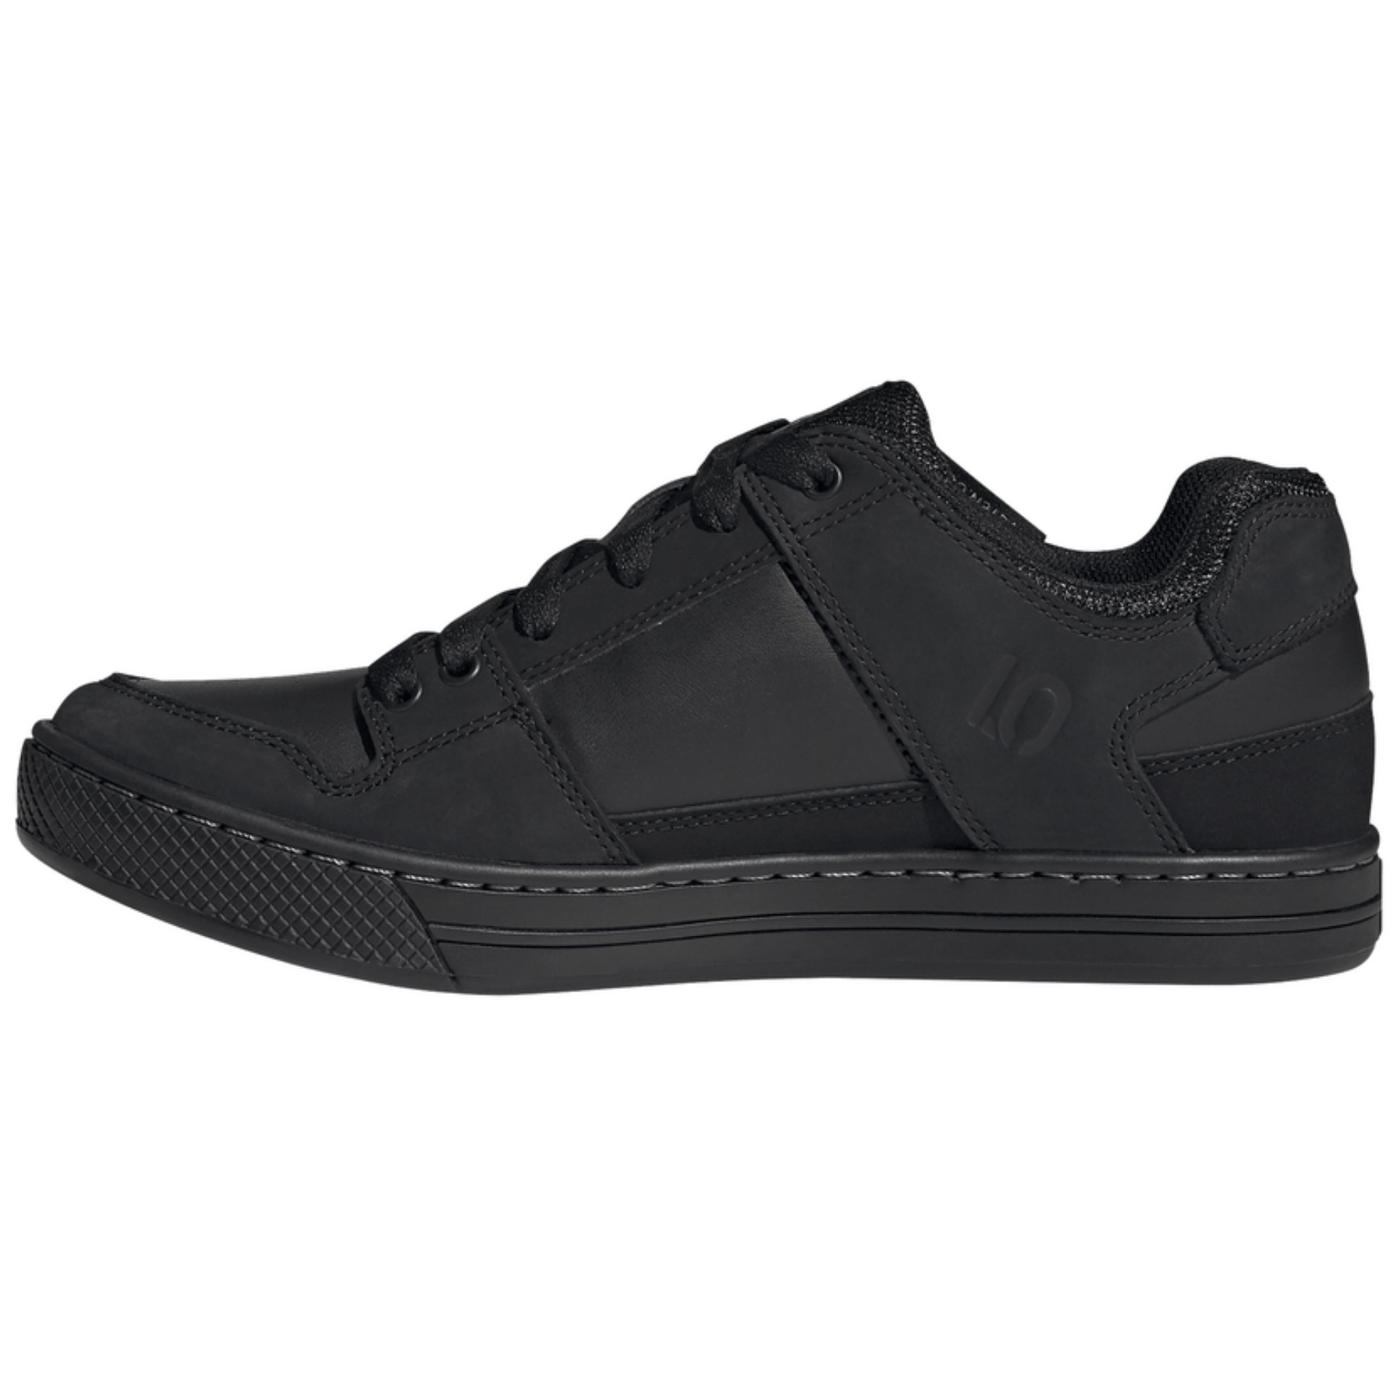 Five Ten Shoes Freerider DLX - Core Black / Core Black / Grey Three 8Lines Shop - Fast Shipping